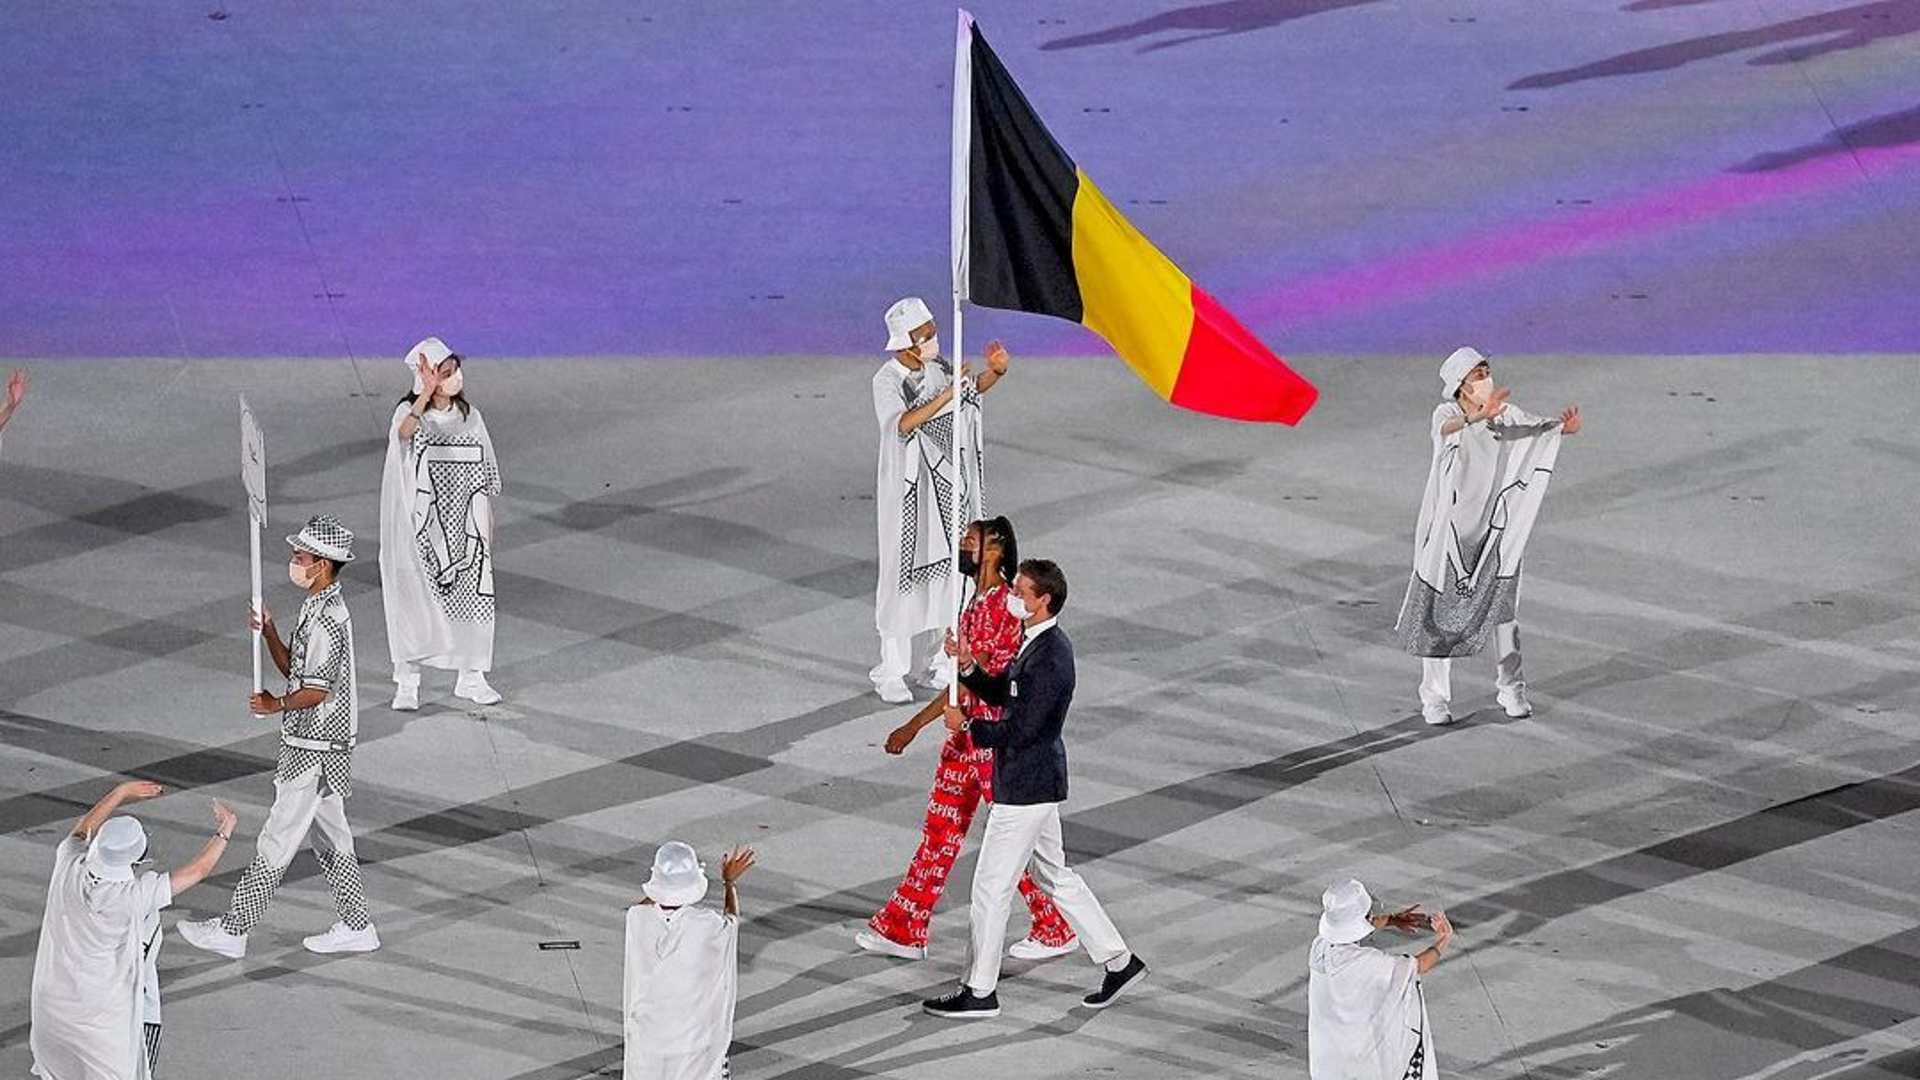 Nafissatou Thiam was the flag bearer of Belgium at the Tokyo Olympics 2020 opening ceremony (Image Credits - Instagram/@thiam_nafi)